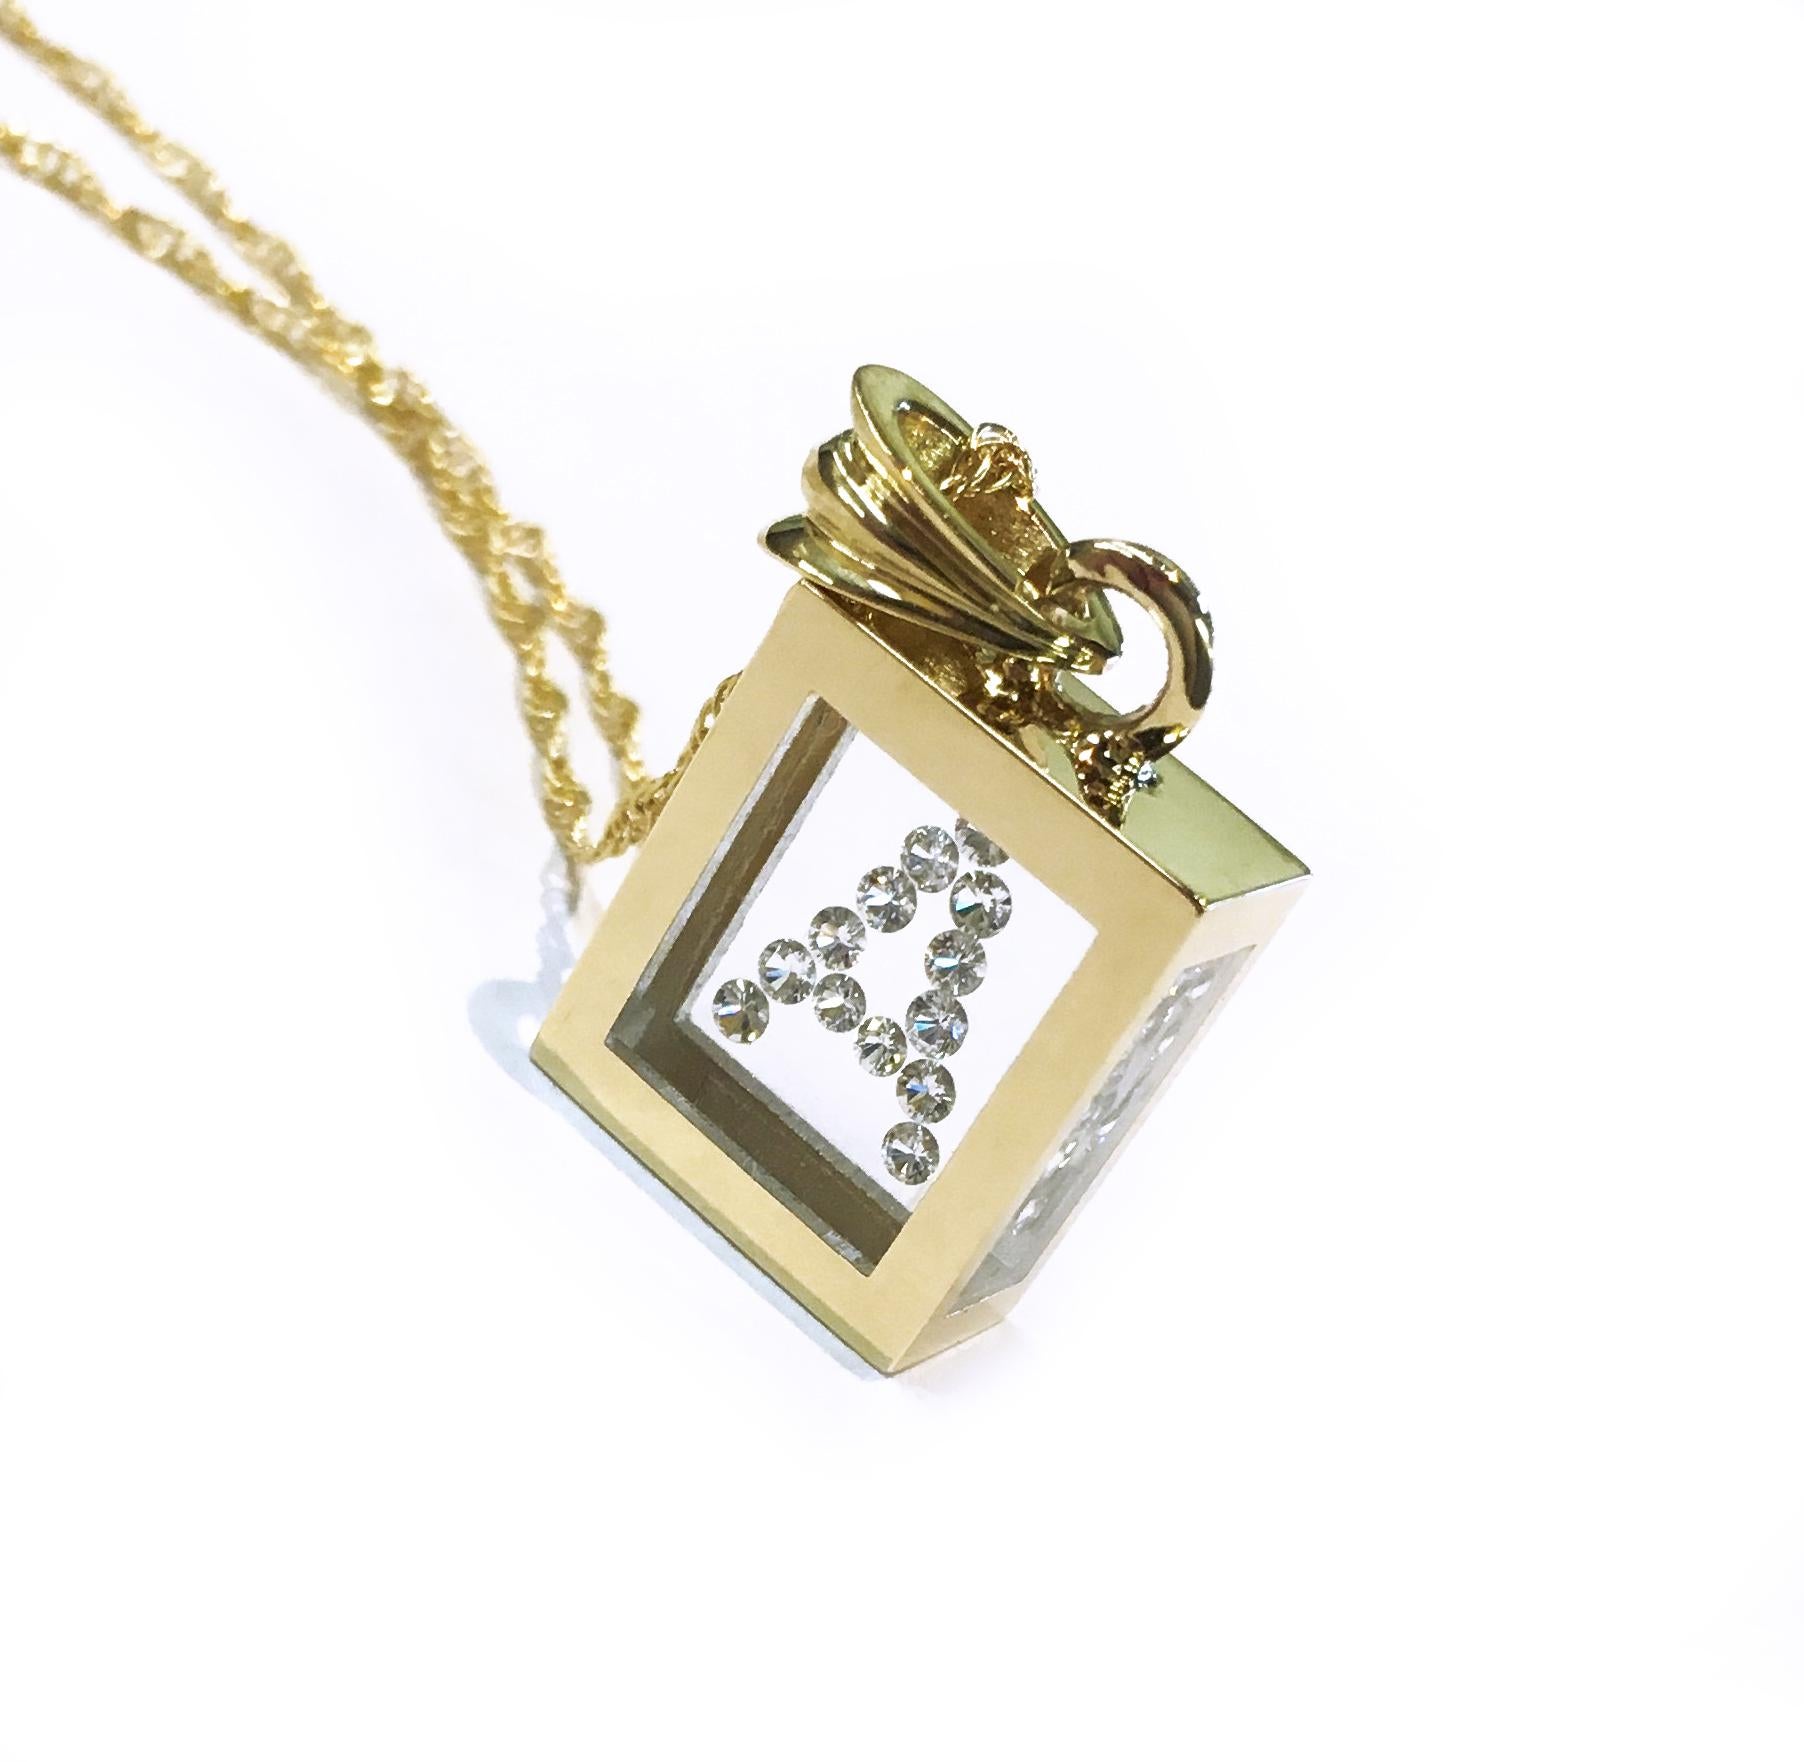 Incogem Floating Diamond Pendant: 14k Yellow Gold, available in letters A-Z. The pendants are handcrafted of recycled 14k yellow gold. The diamonds are brilliant cut, 58 facets, VS1 in clarity (G.I.A.) and H in color (G.I.A.). Each diamond weighs